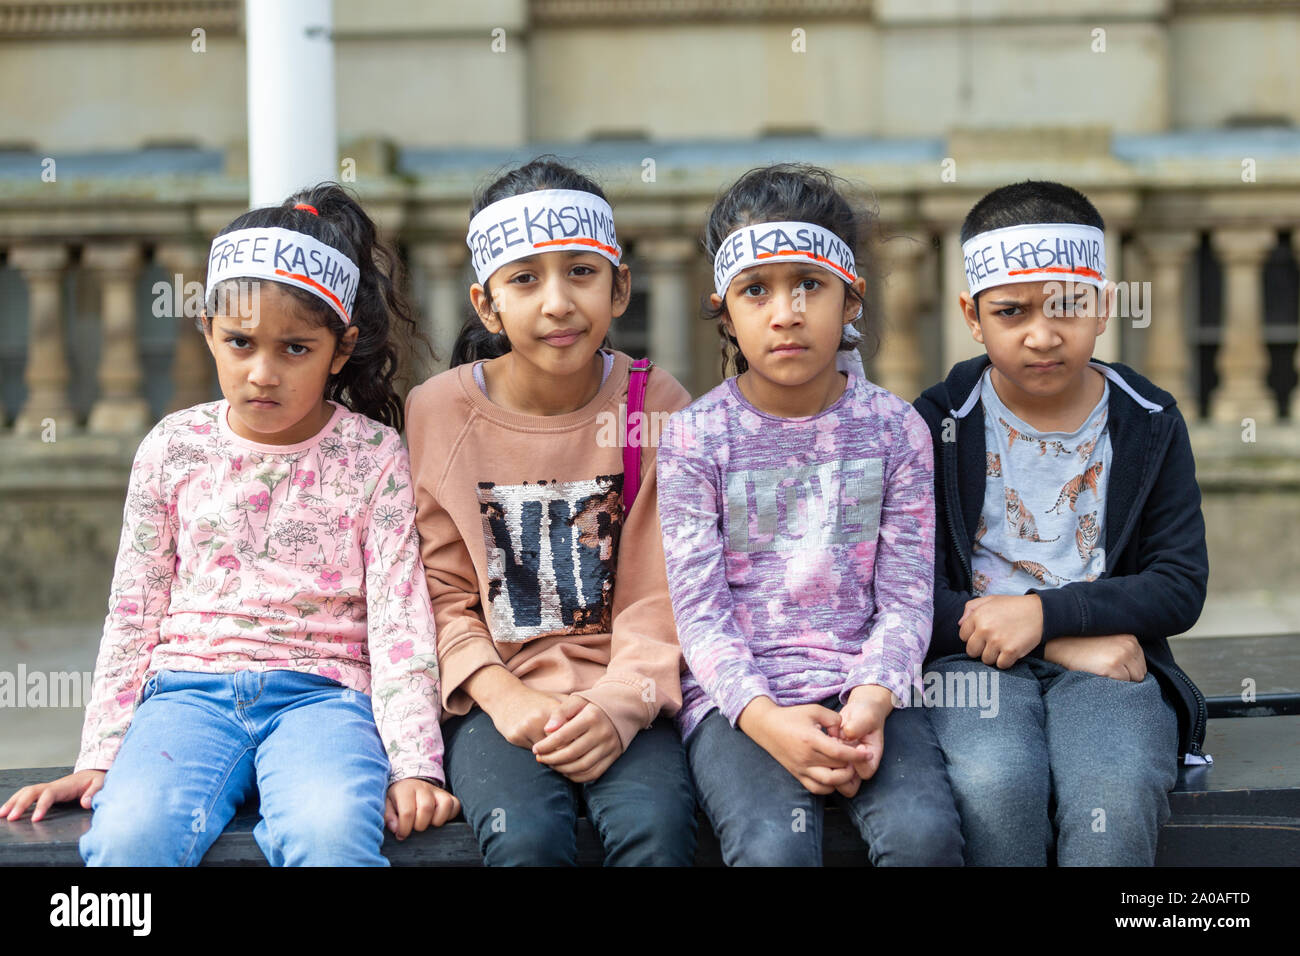 Four young children at a Kasmiri protes, UK Stock Photo